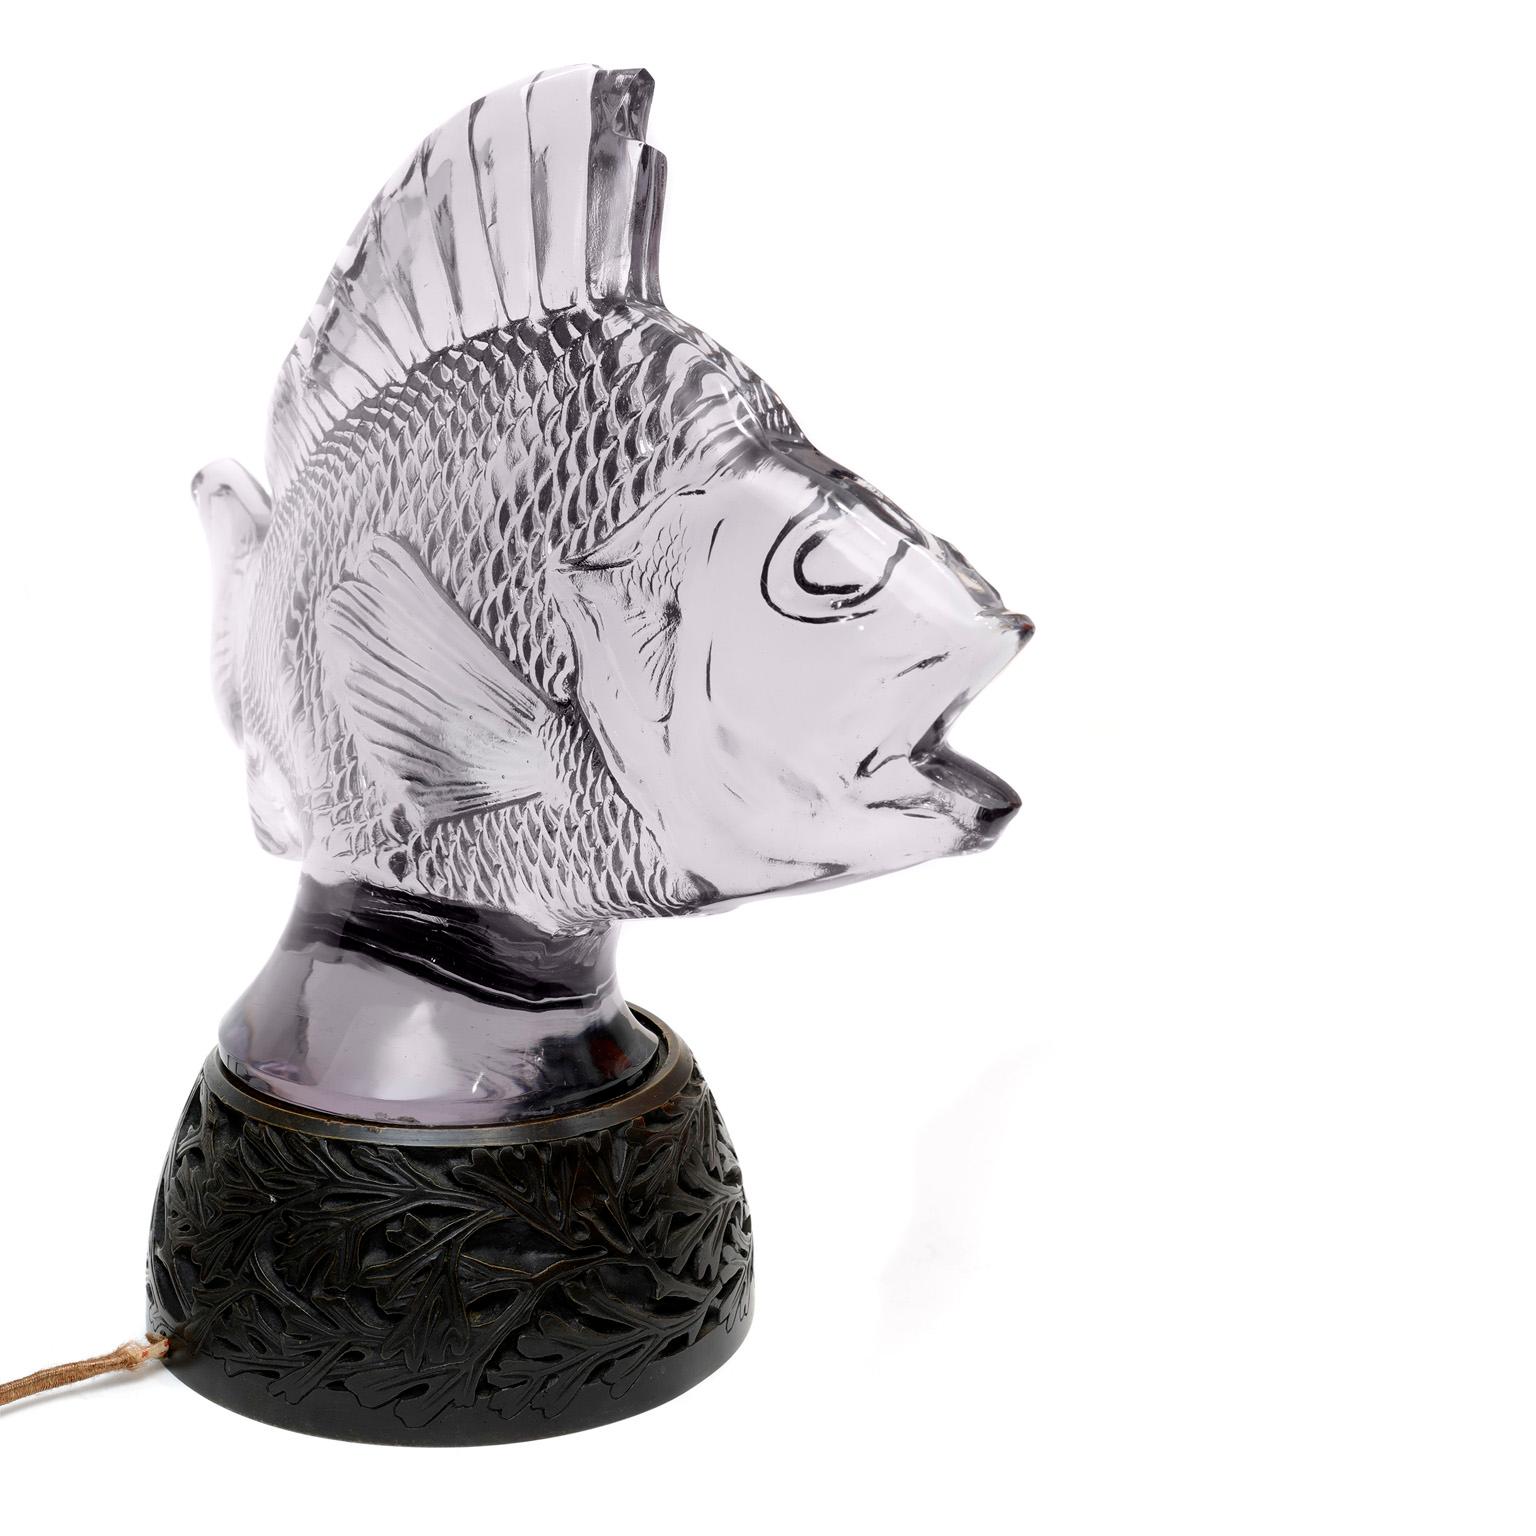 Authentic Lalique Glass Fish Sculpture Lamp, made in France.  Enhance a beachfront home,  delight a fishing enthusiast, or treat your favorite Pisces to something exquisite.  Lalique glass fish sculpture illuminates atop the simple lamp base.
PBF